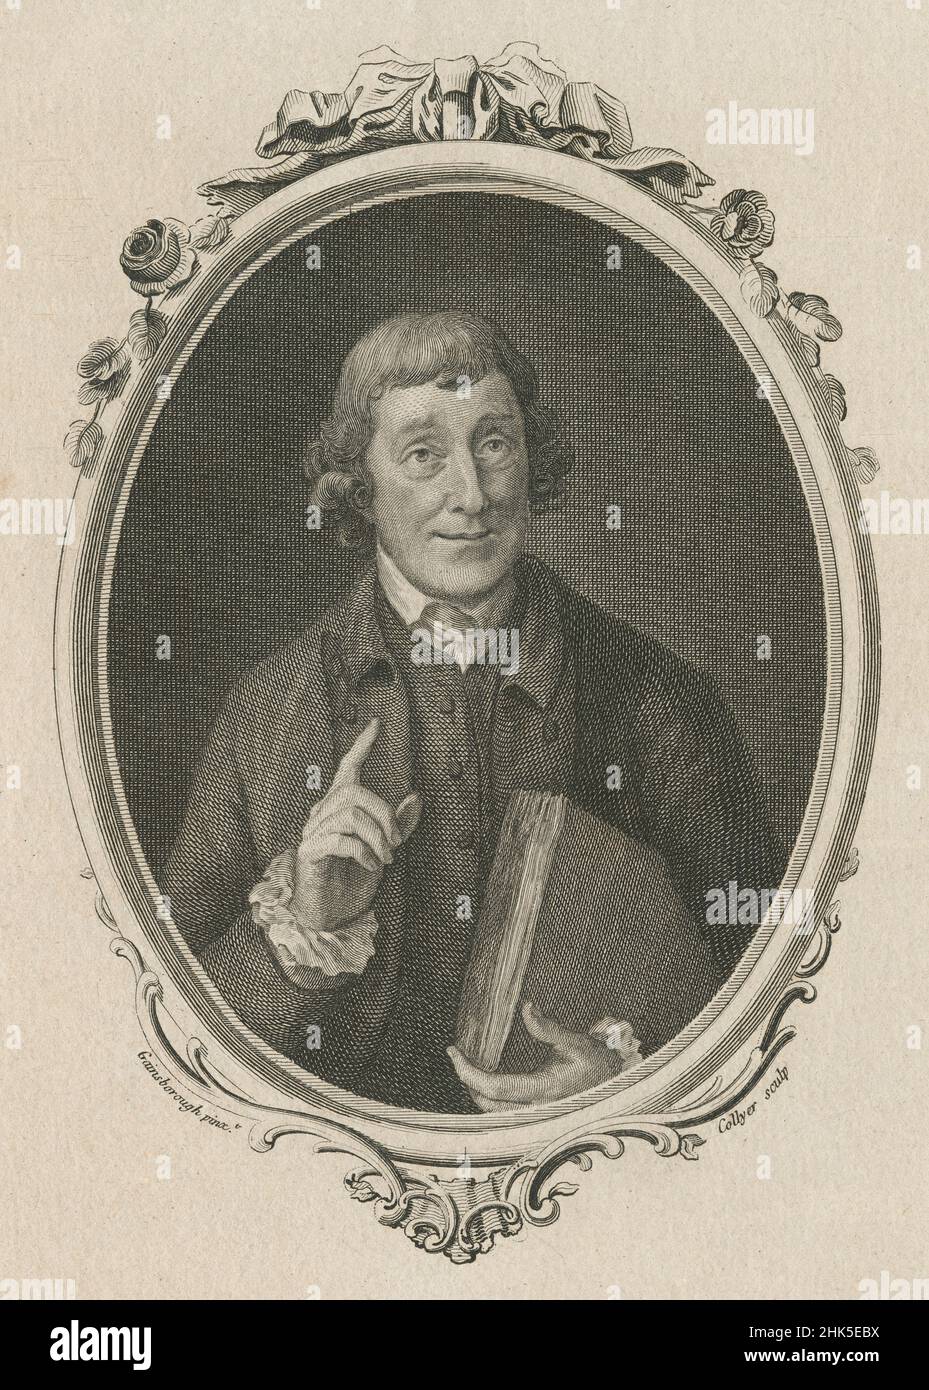 Antique 1778 engraving of Paul Whitehead. Paul Whitehead (1710-1774) was a British satirist and a secretary to the infamous Hellfire Club. SOURCE: ORIGINAL ENGRAVING Stock Photo